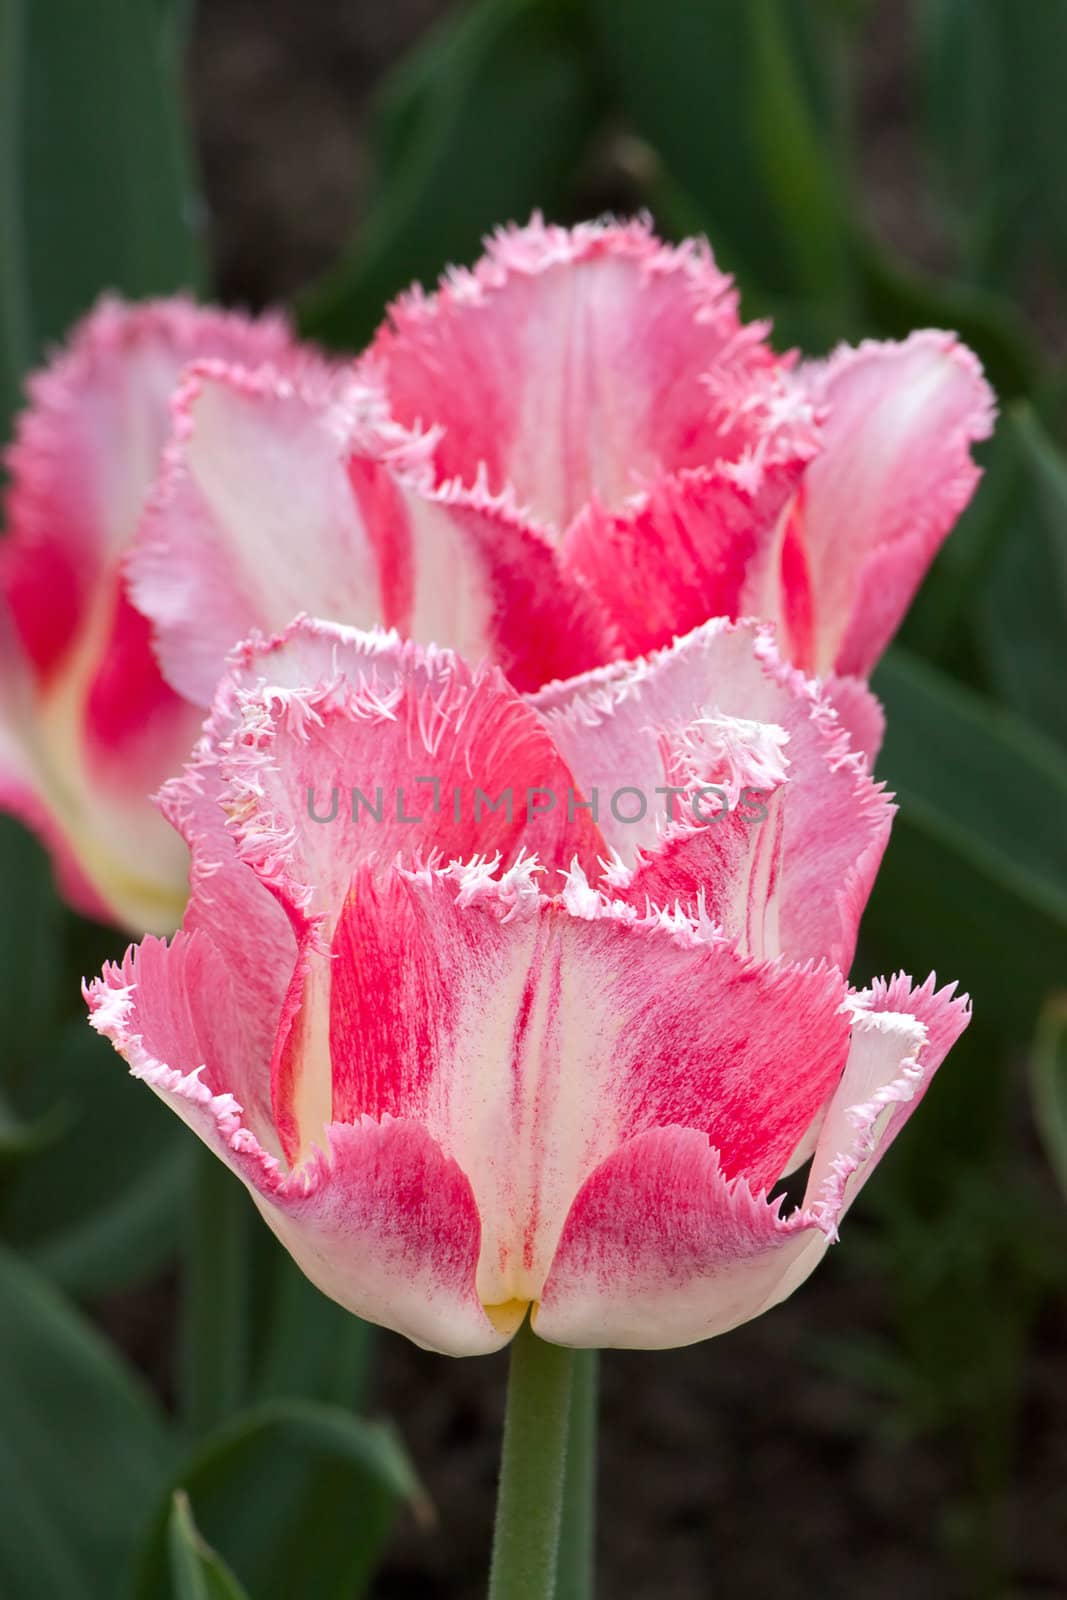 Set of tulips of different forms of flowers and colors. Image with shallow depth of field.